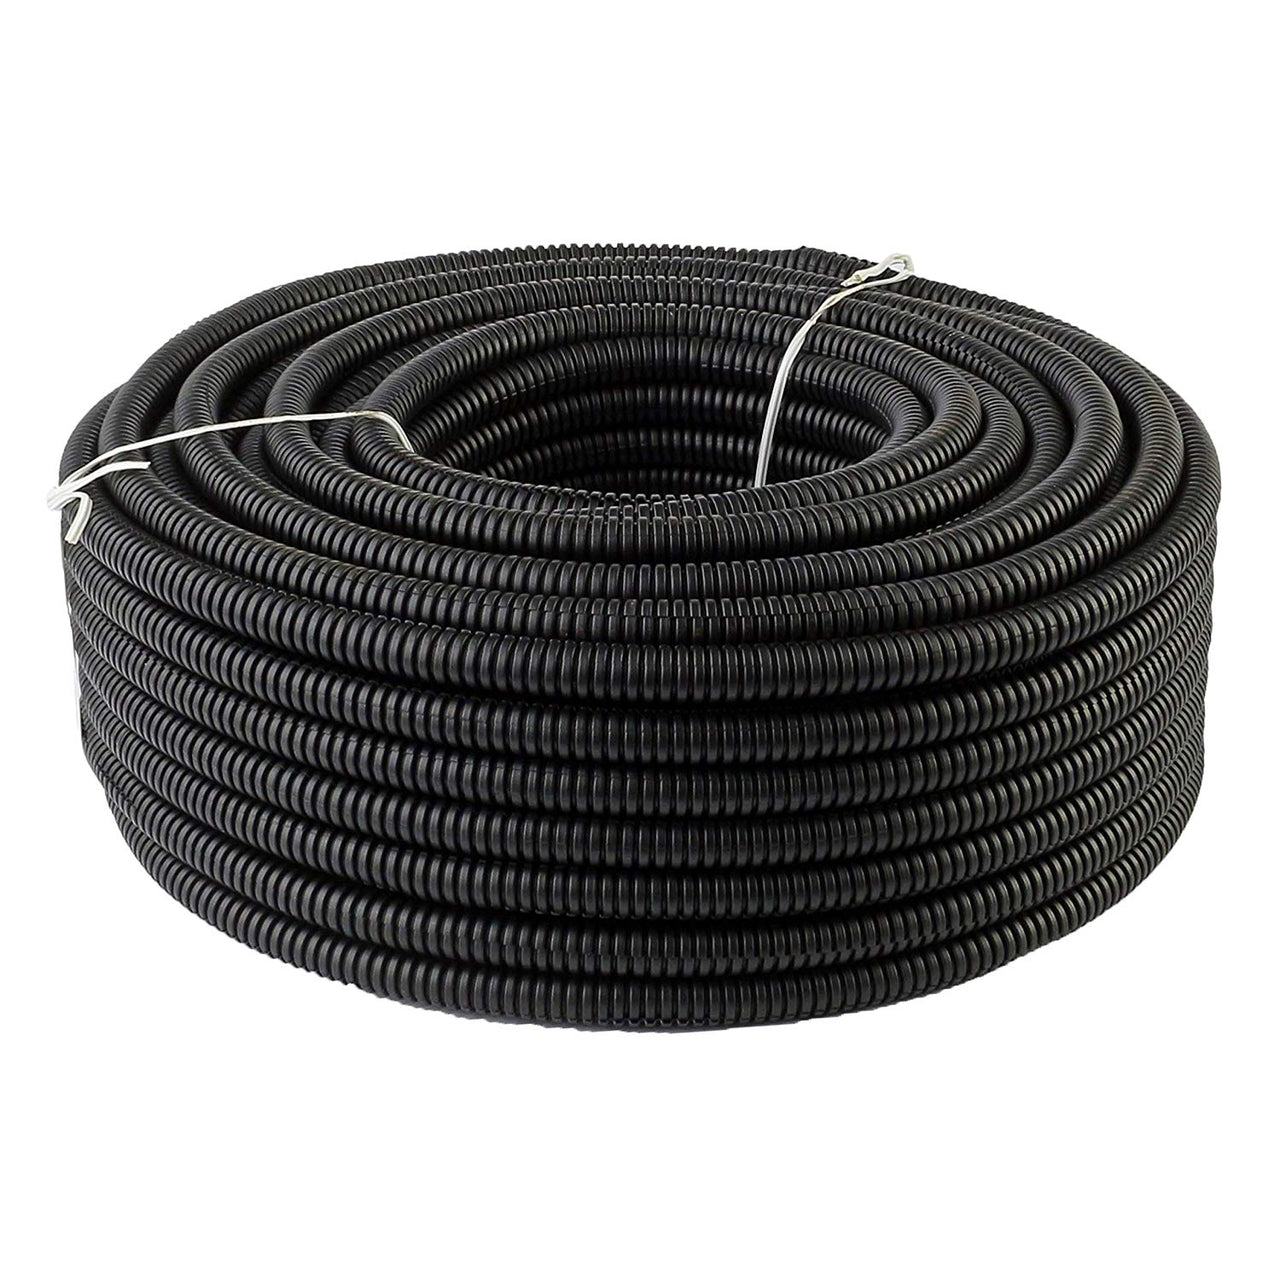 100 FT 1/4" INCH Split Loom Tubing Wire Conduit Hose Cover Auto Home Marine Blk